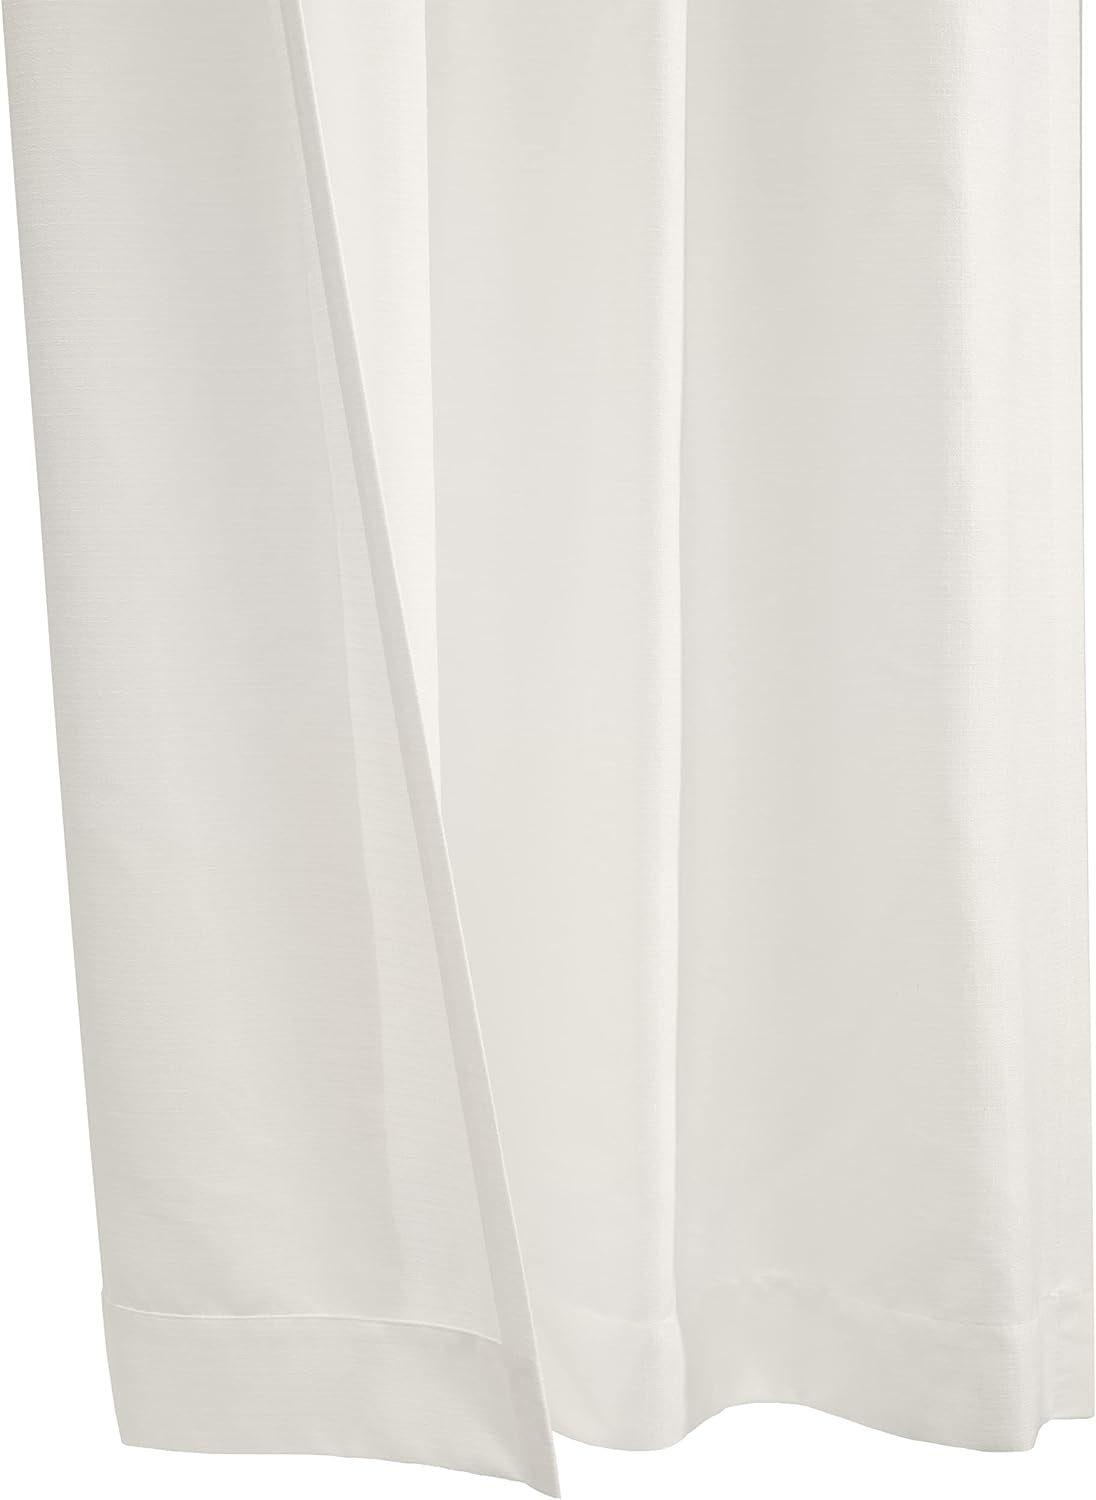 Commonwealth Home Fashions Mulberry Back Tab Curtain Panel Window Dressing 54 X 84 in White (71996-142-54-84-001)  Commonwealth Home Fashions   